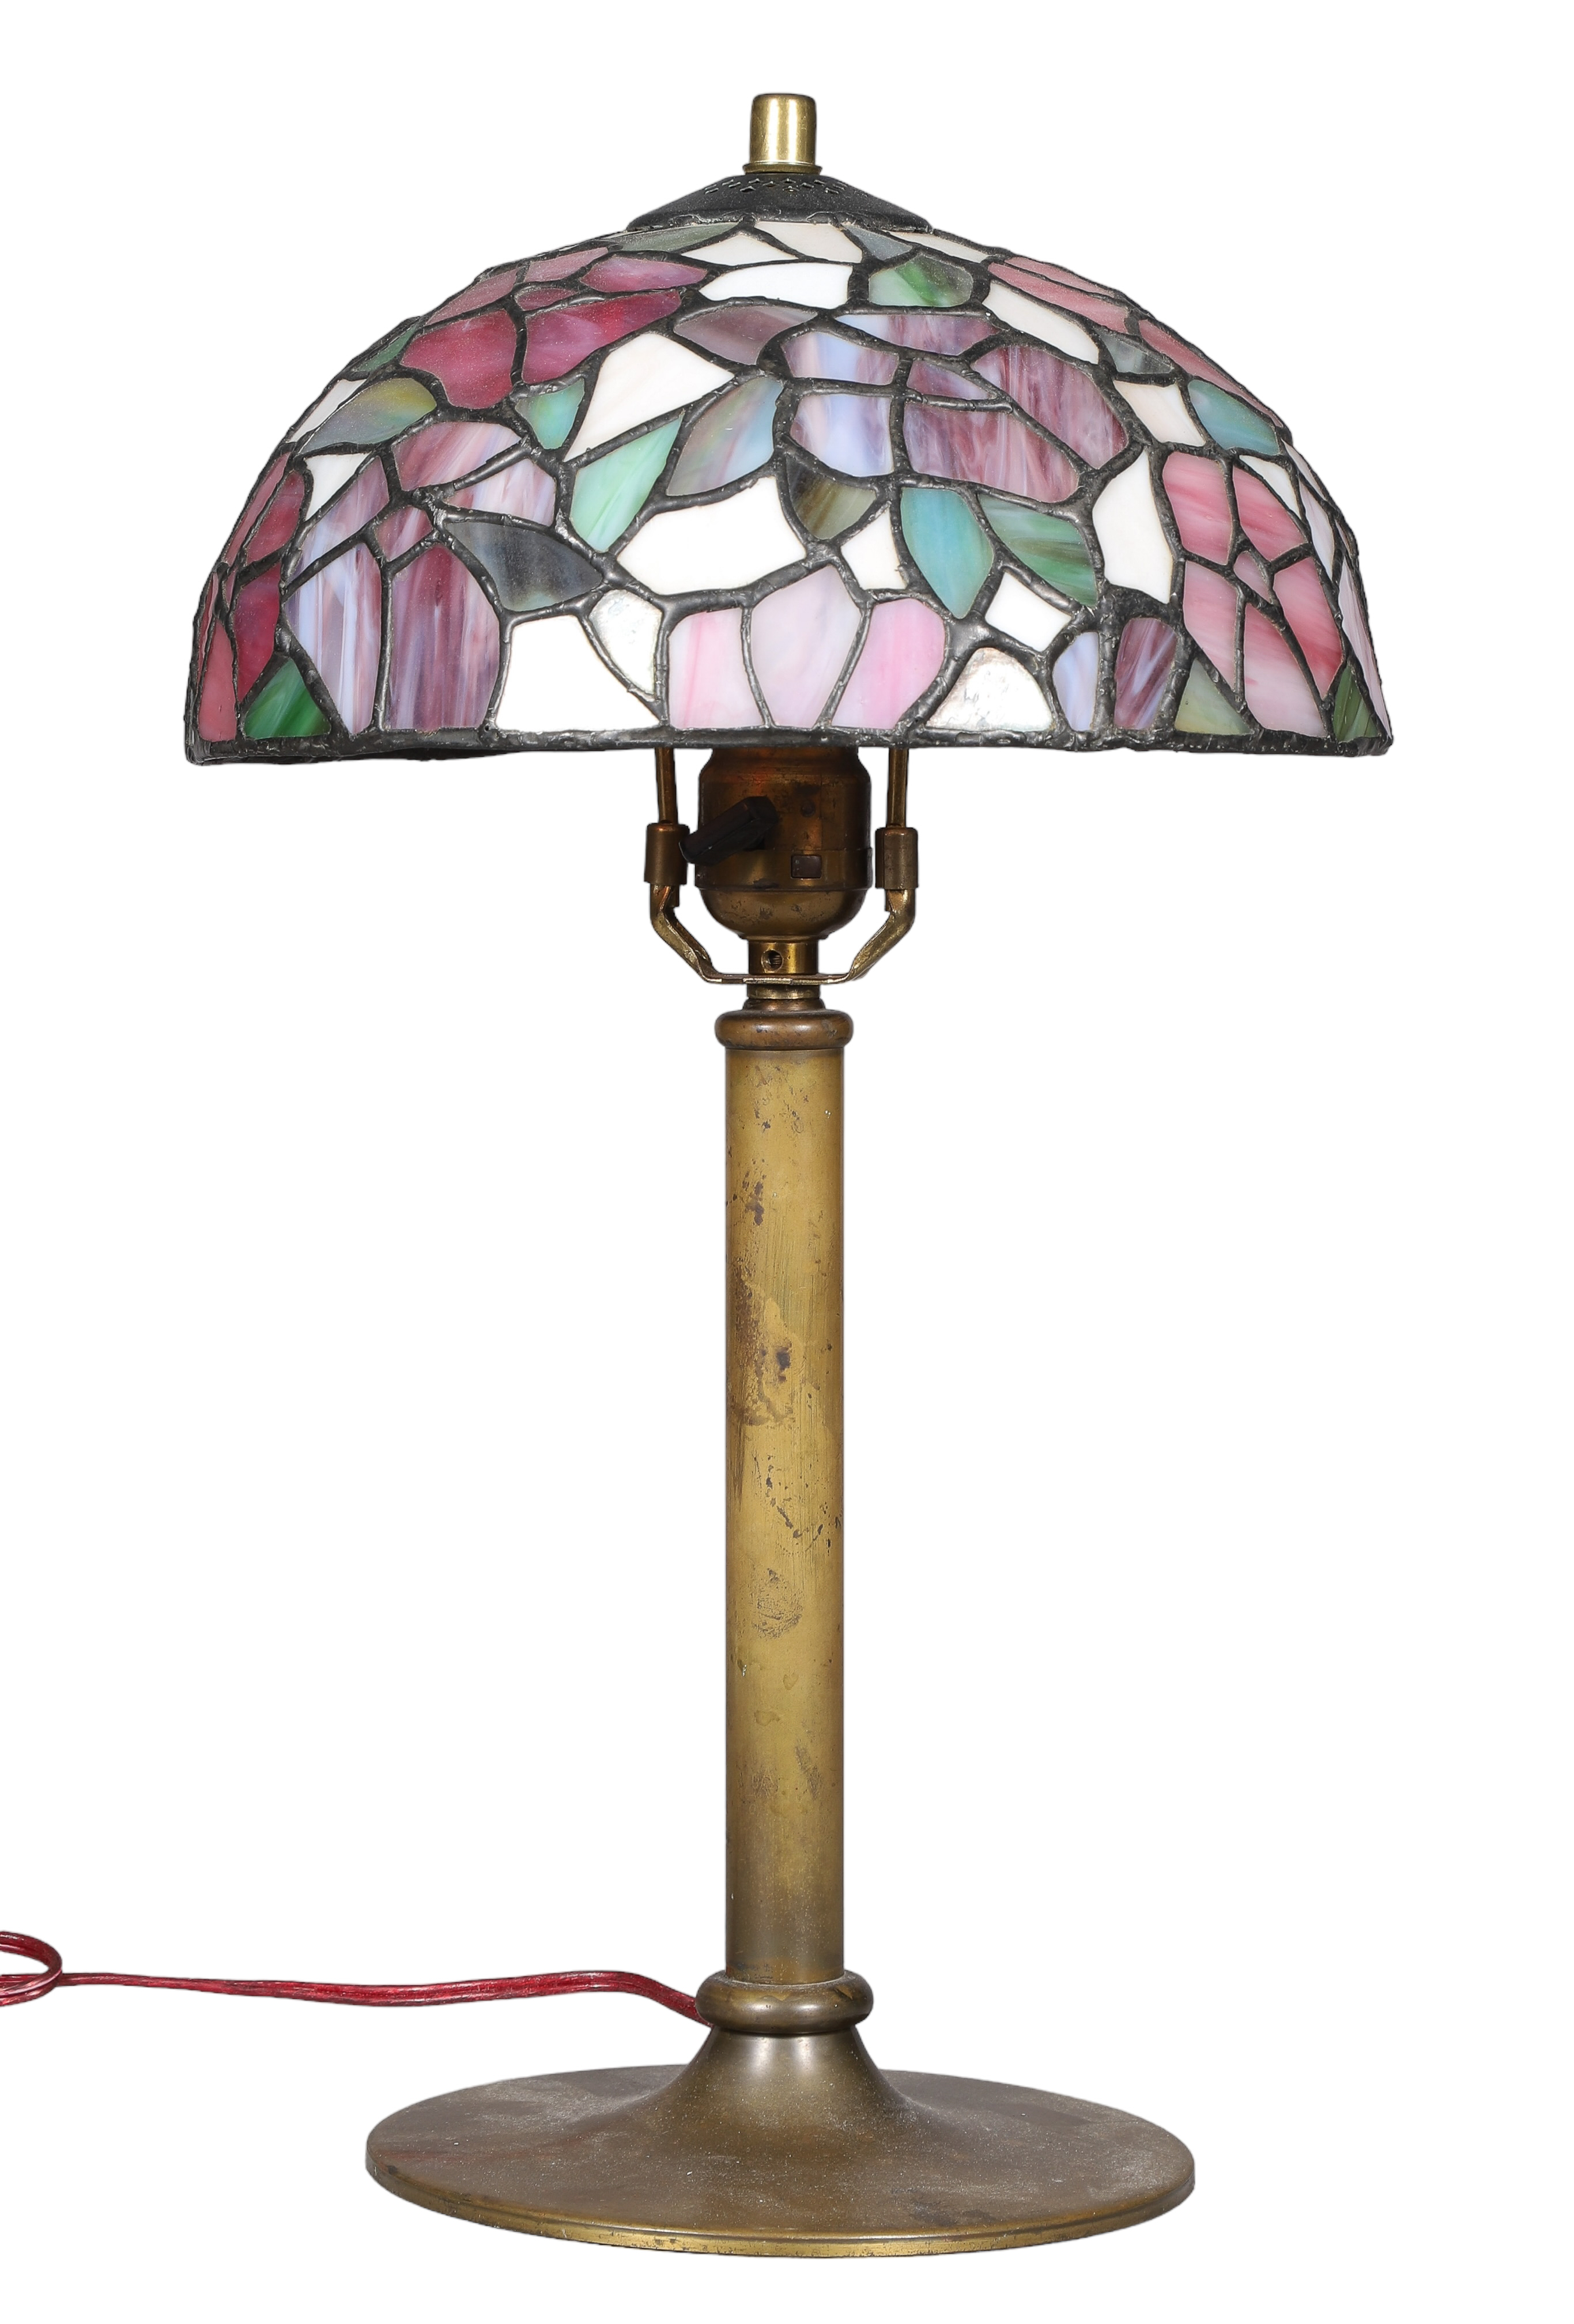 Leaded glass table lamp, floral